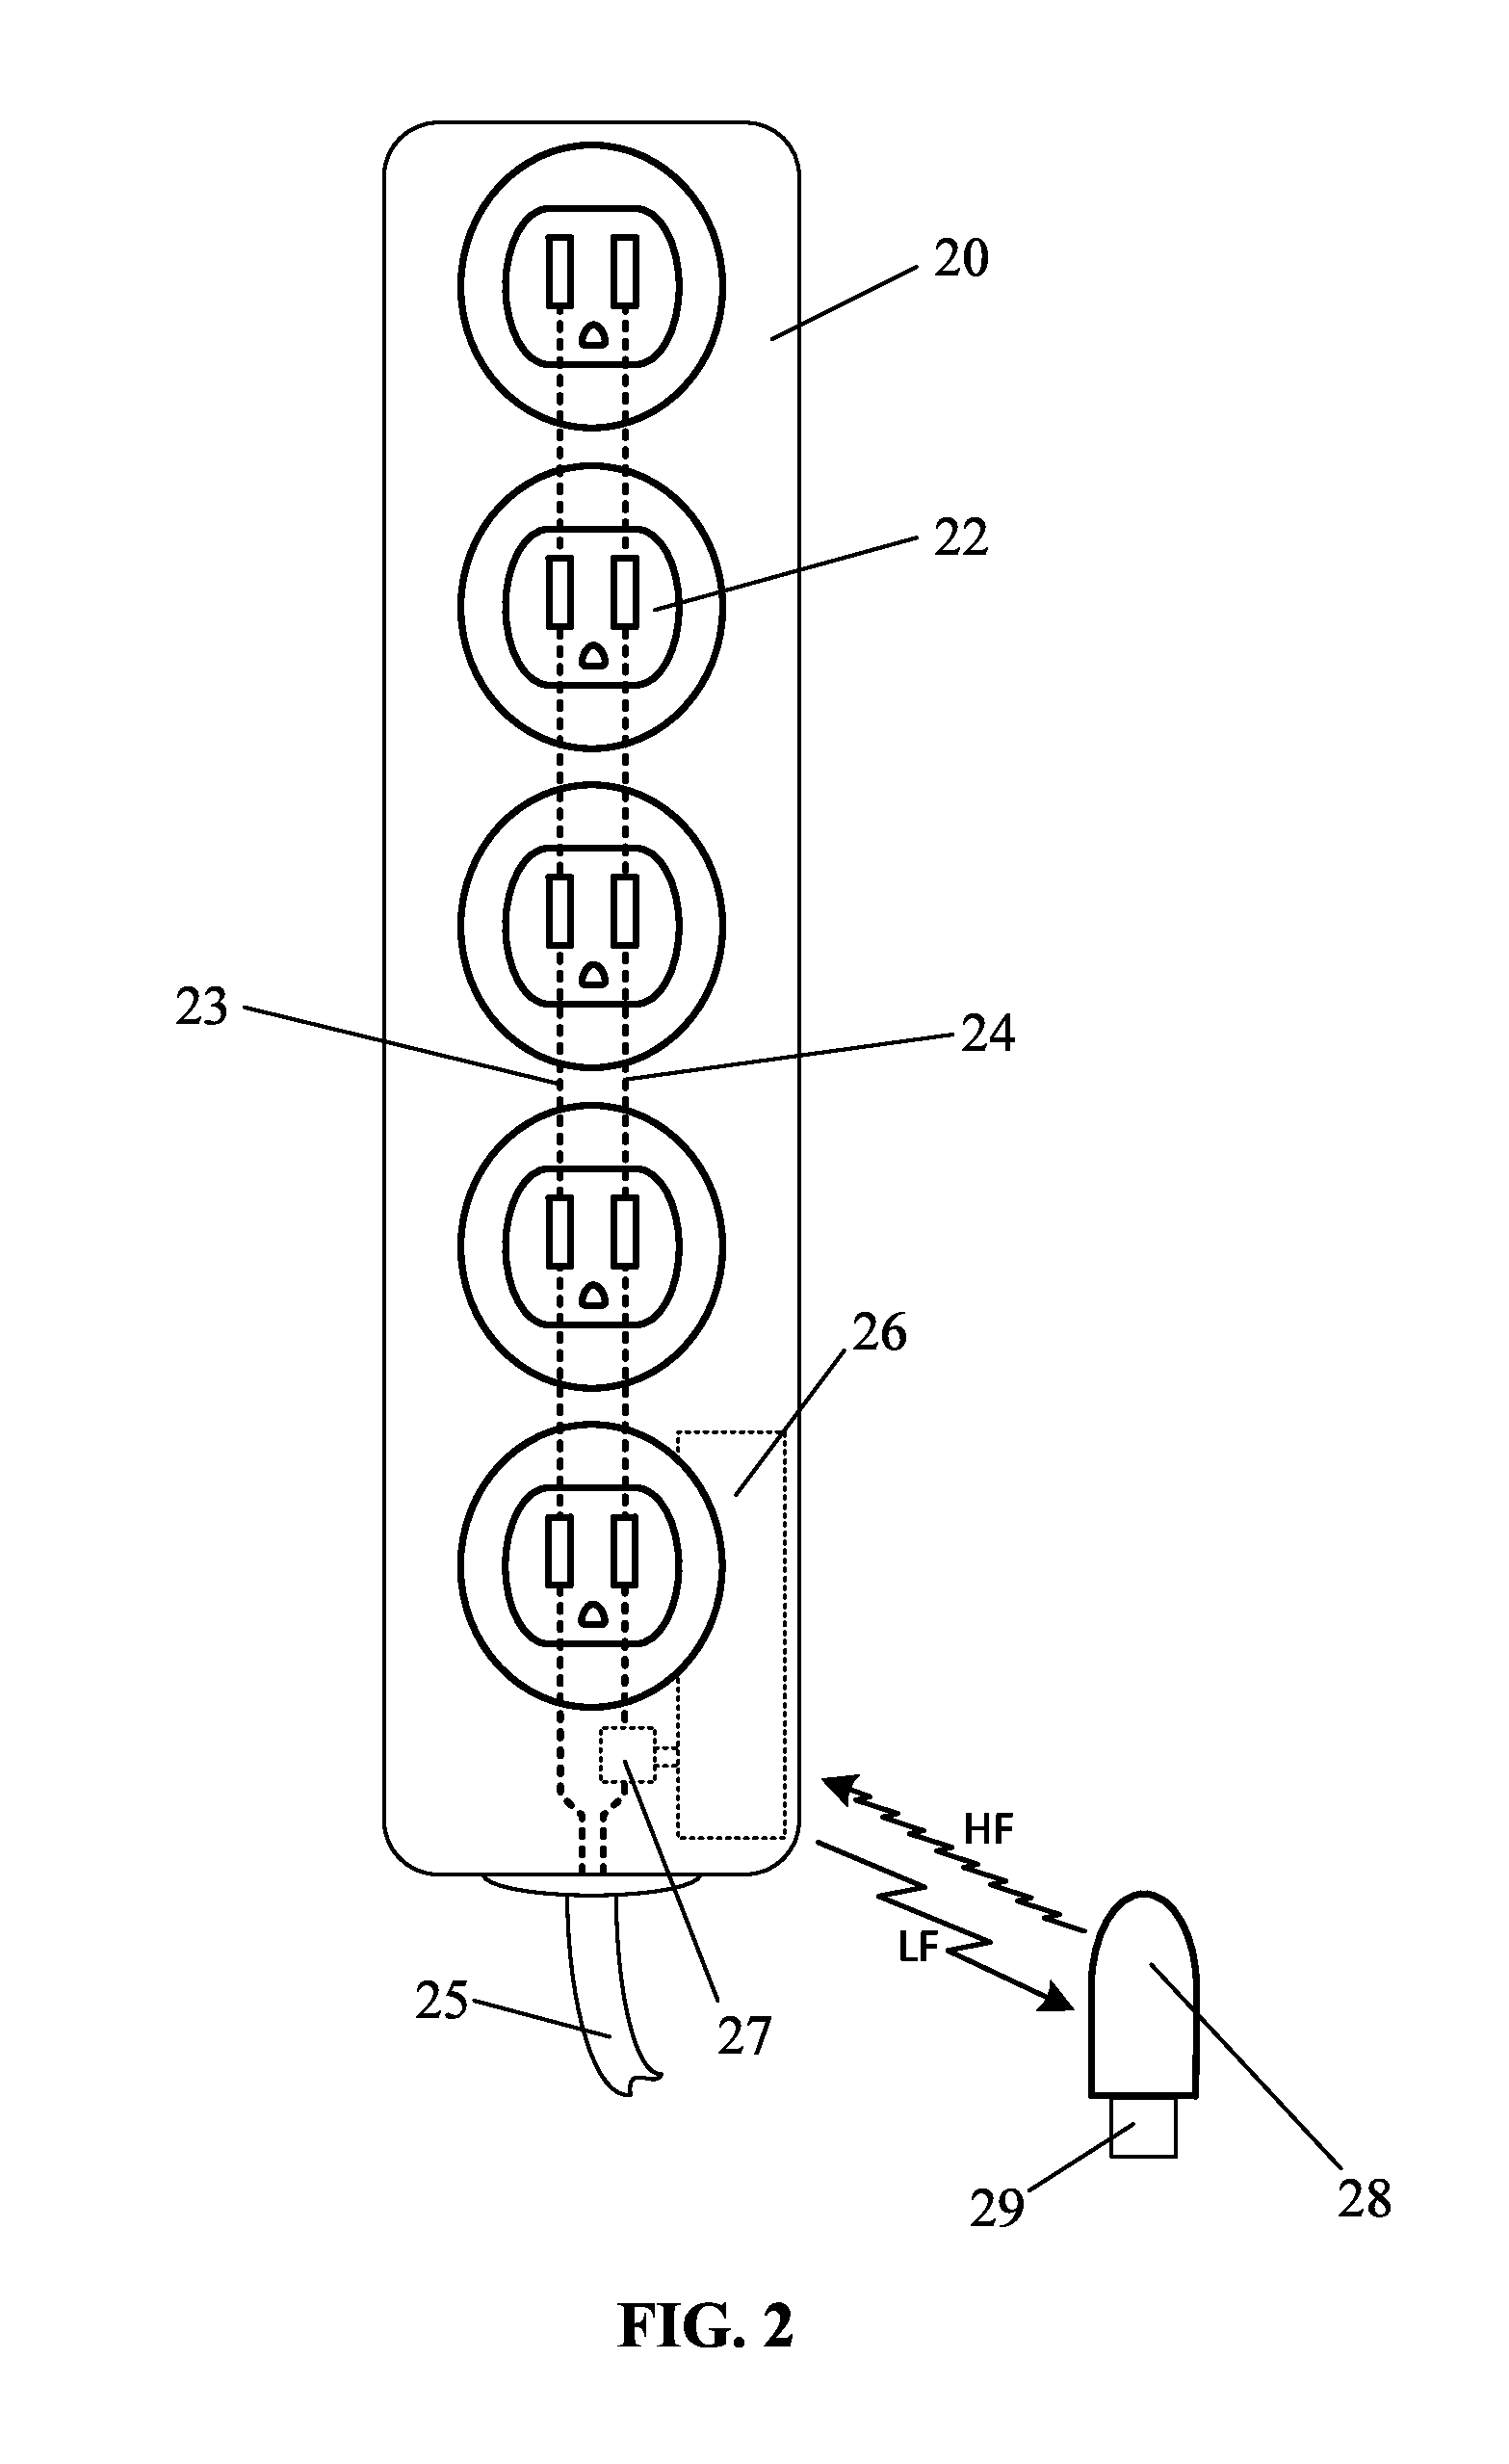 Proximity-interrogative smart fob switching of electrical device